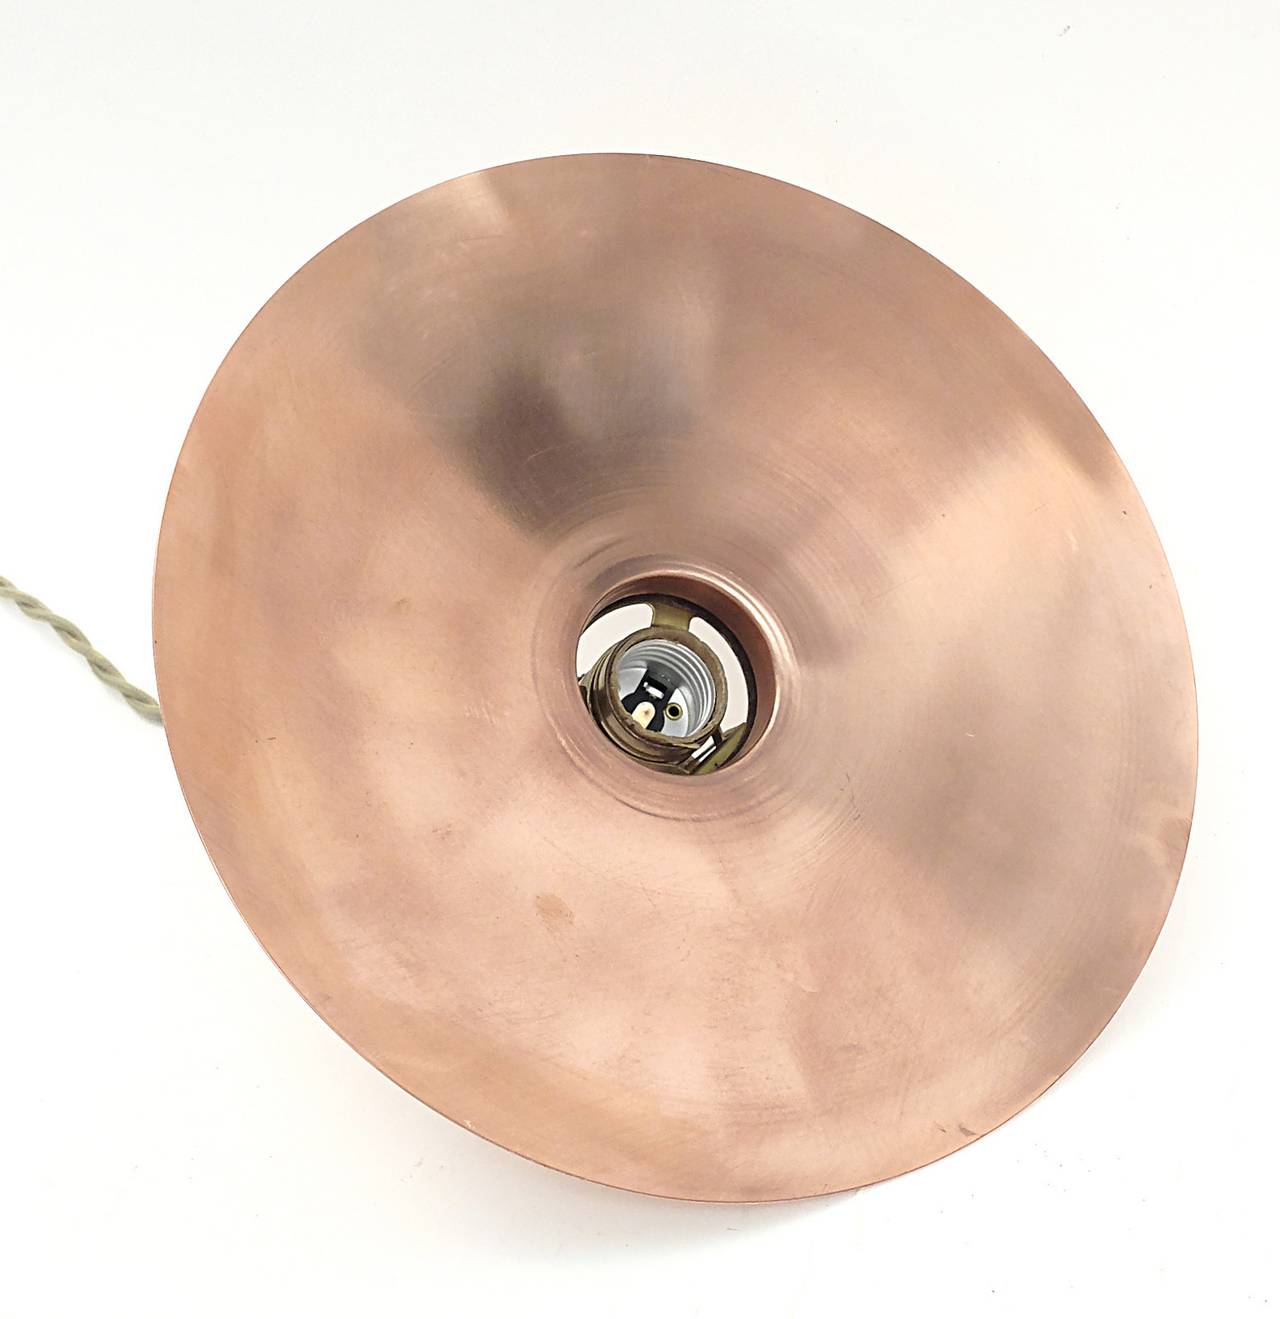 German hanging lamps of different diameters, made of copper in the shape of circular plate with connection for the bulb and switch  made out of brass. Braided fabric wire. Sold separately for $ 450,00 each.